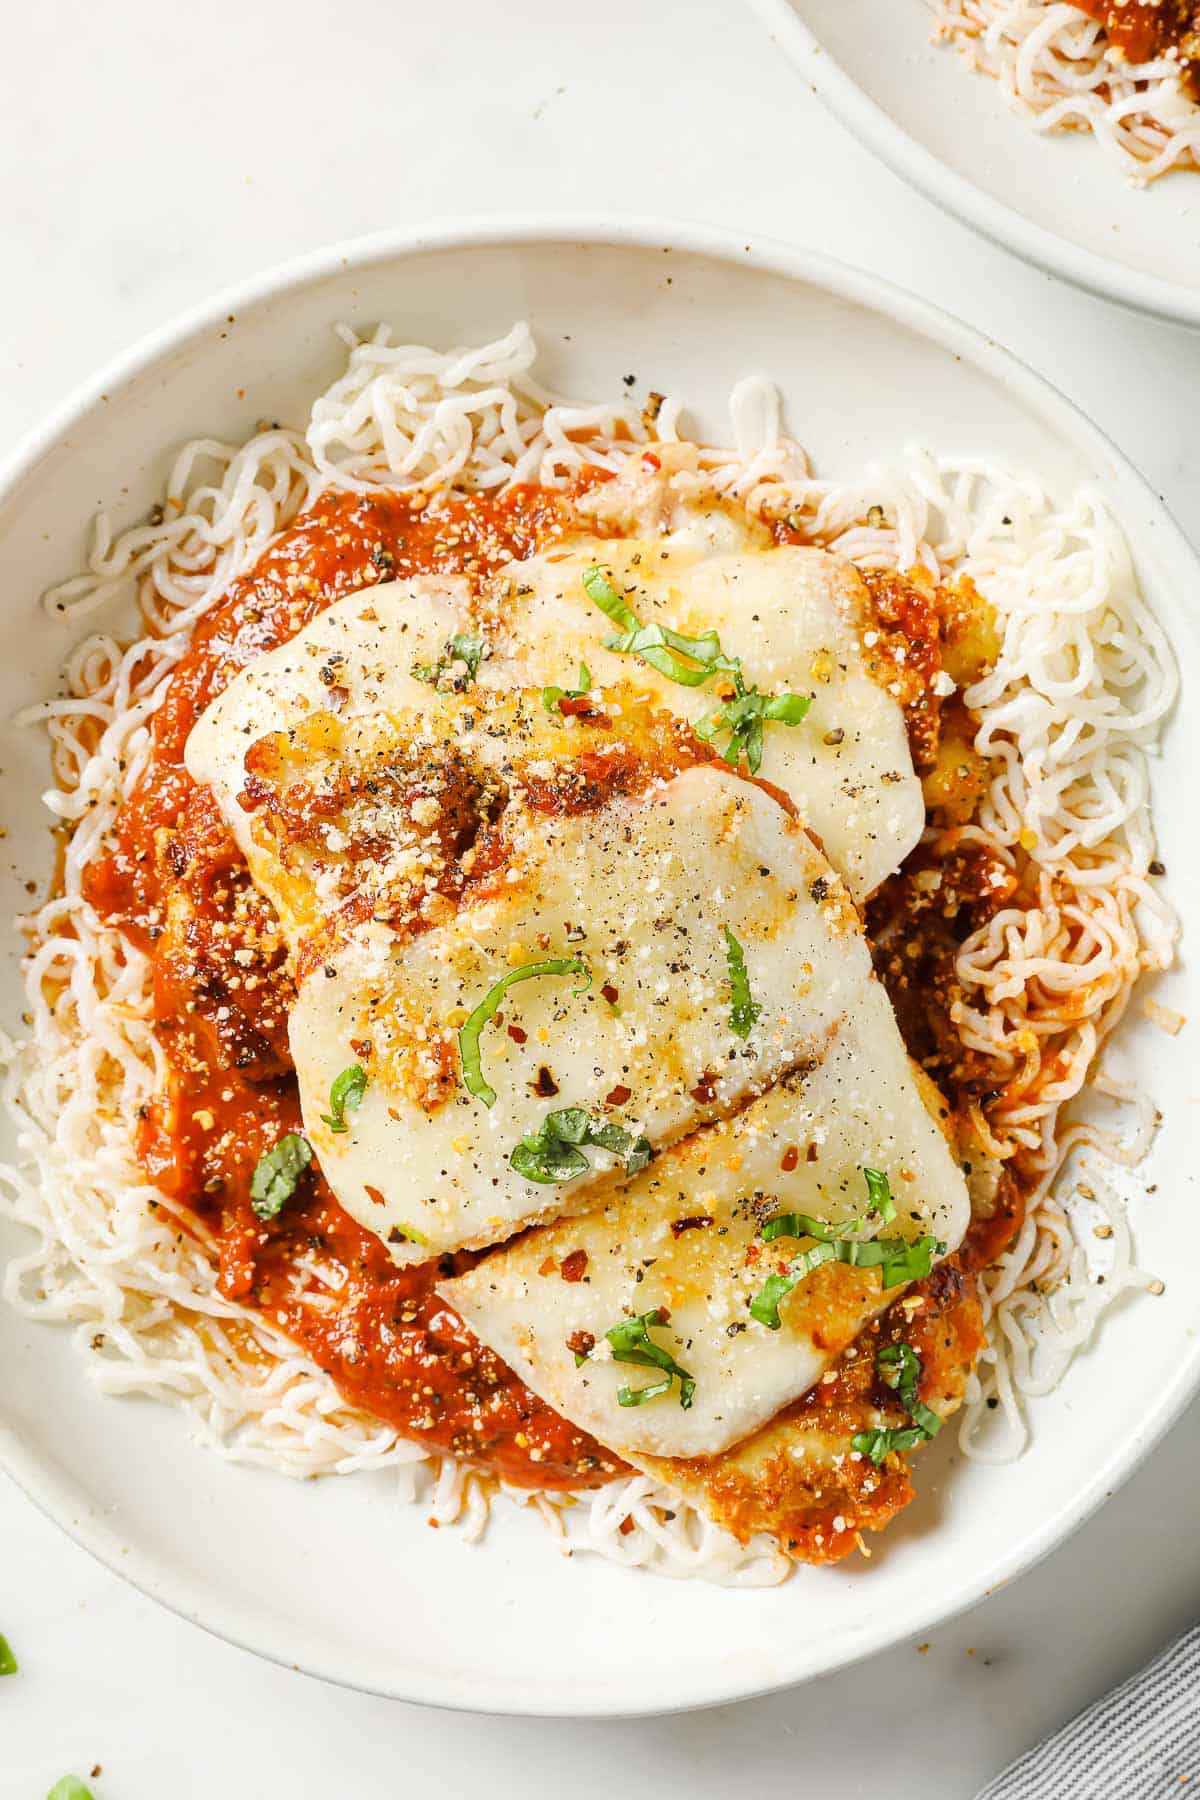 A white bowl with a plate of breaded chicken with melted cheese in a pool of marinara sauce, on top of shirataki noodles.